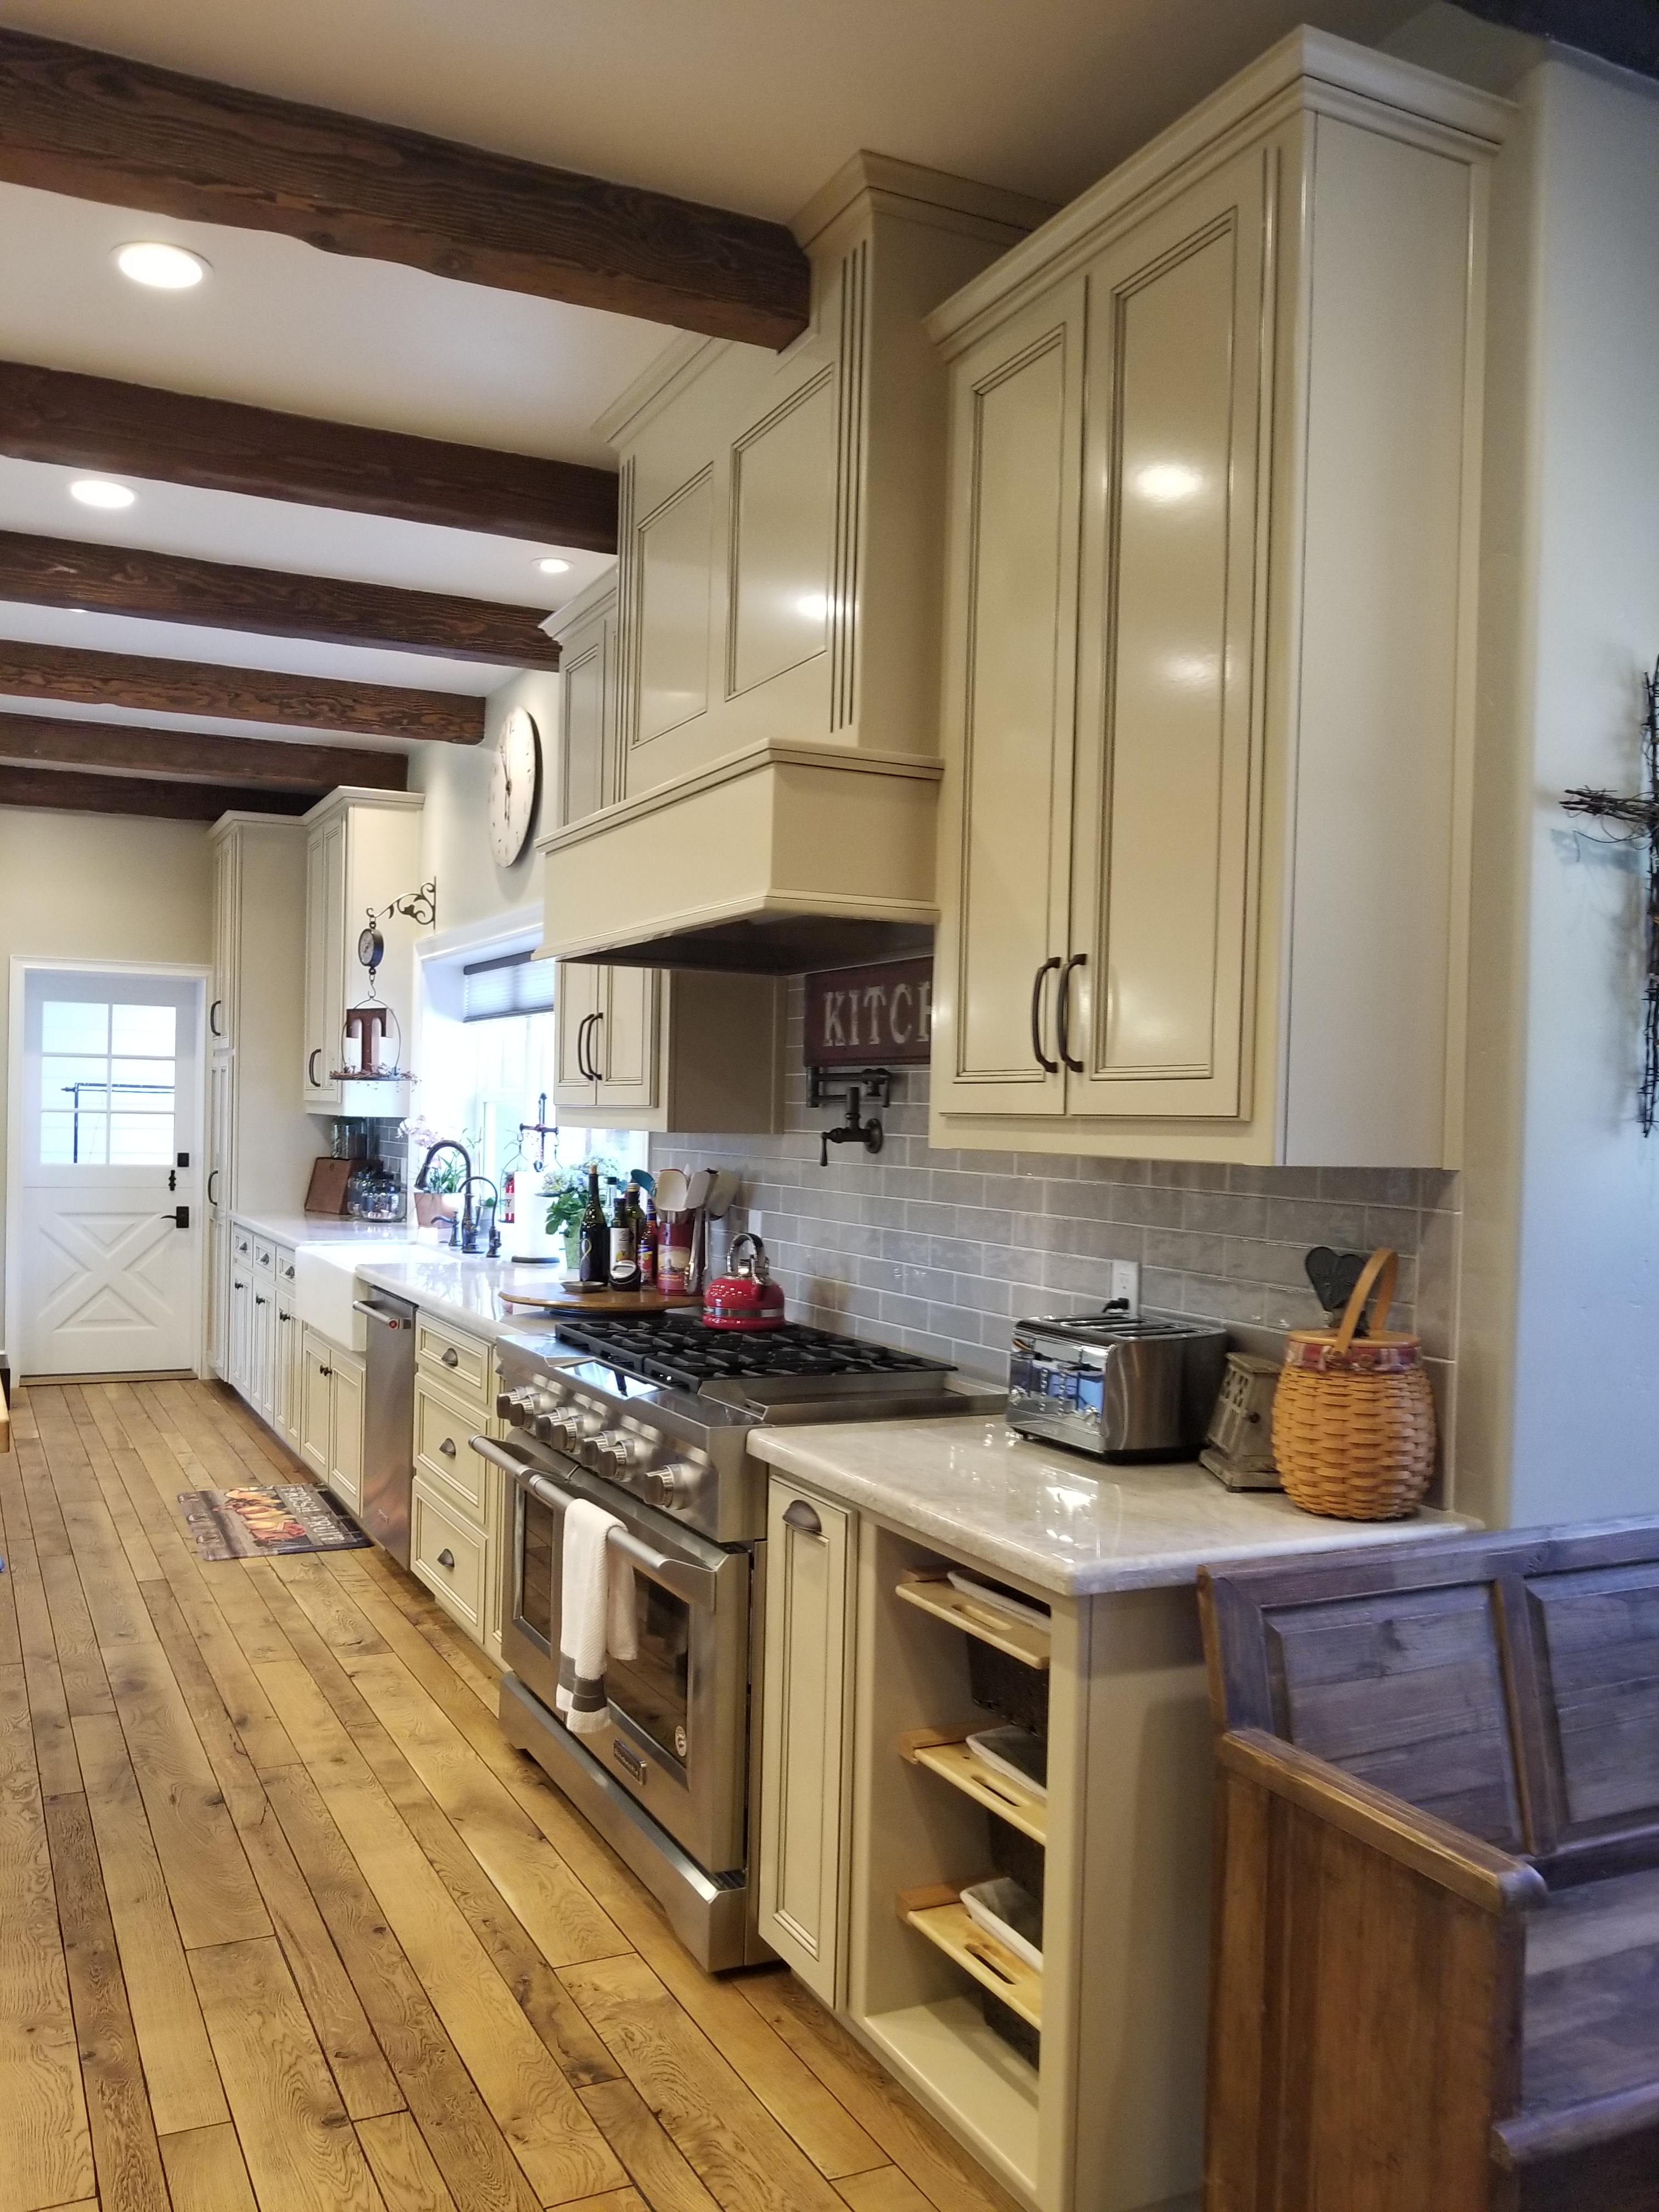 Morro Bay Cabinets Family Owned Since 1974 Custom Cabinetry And